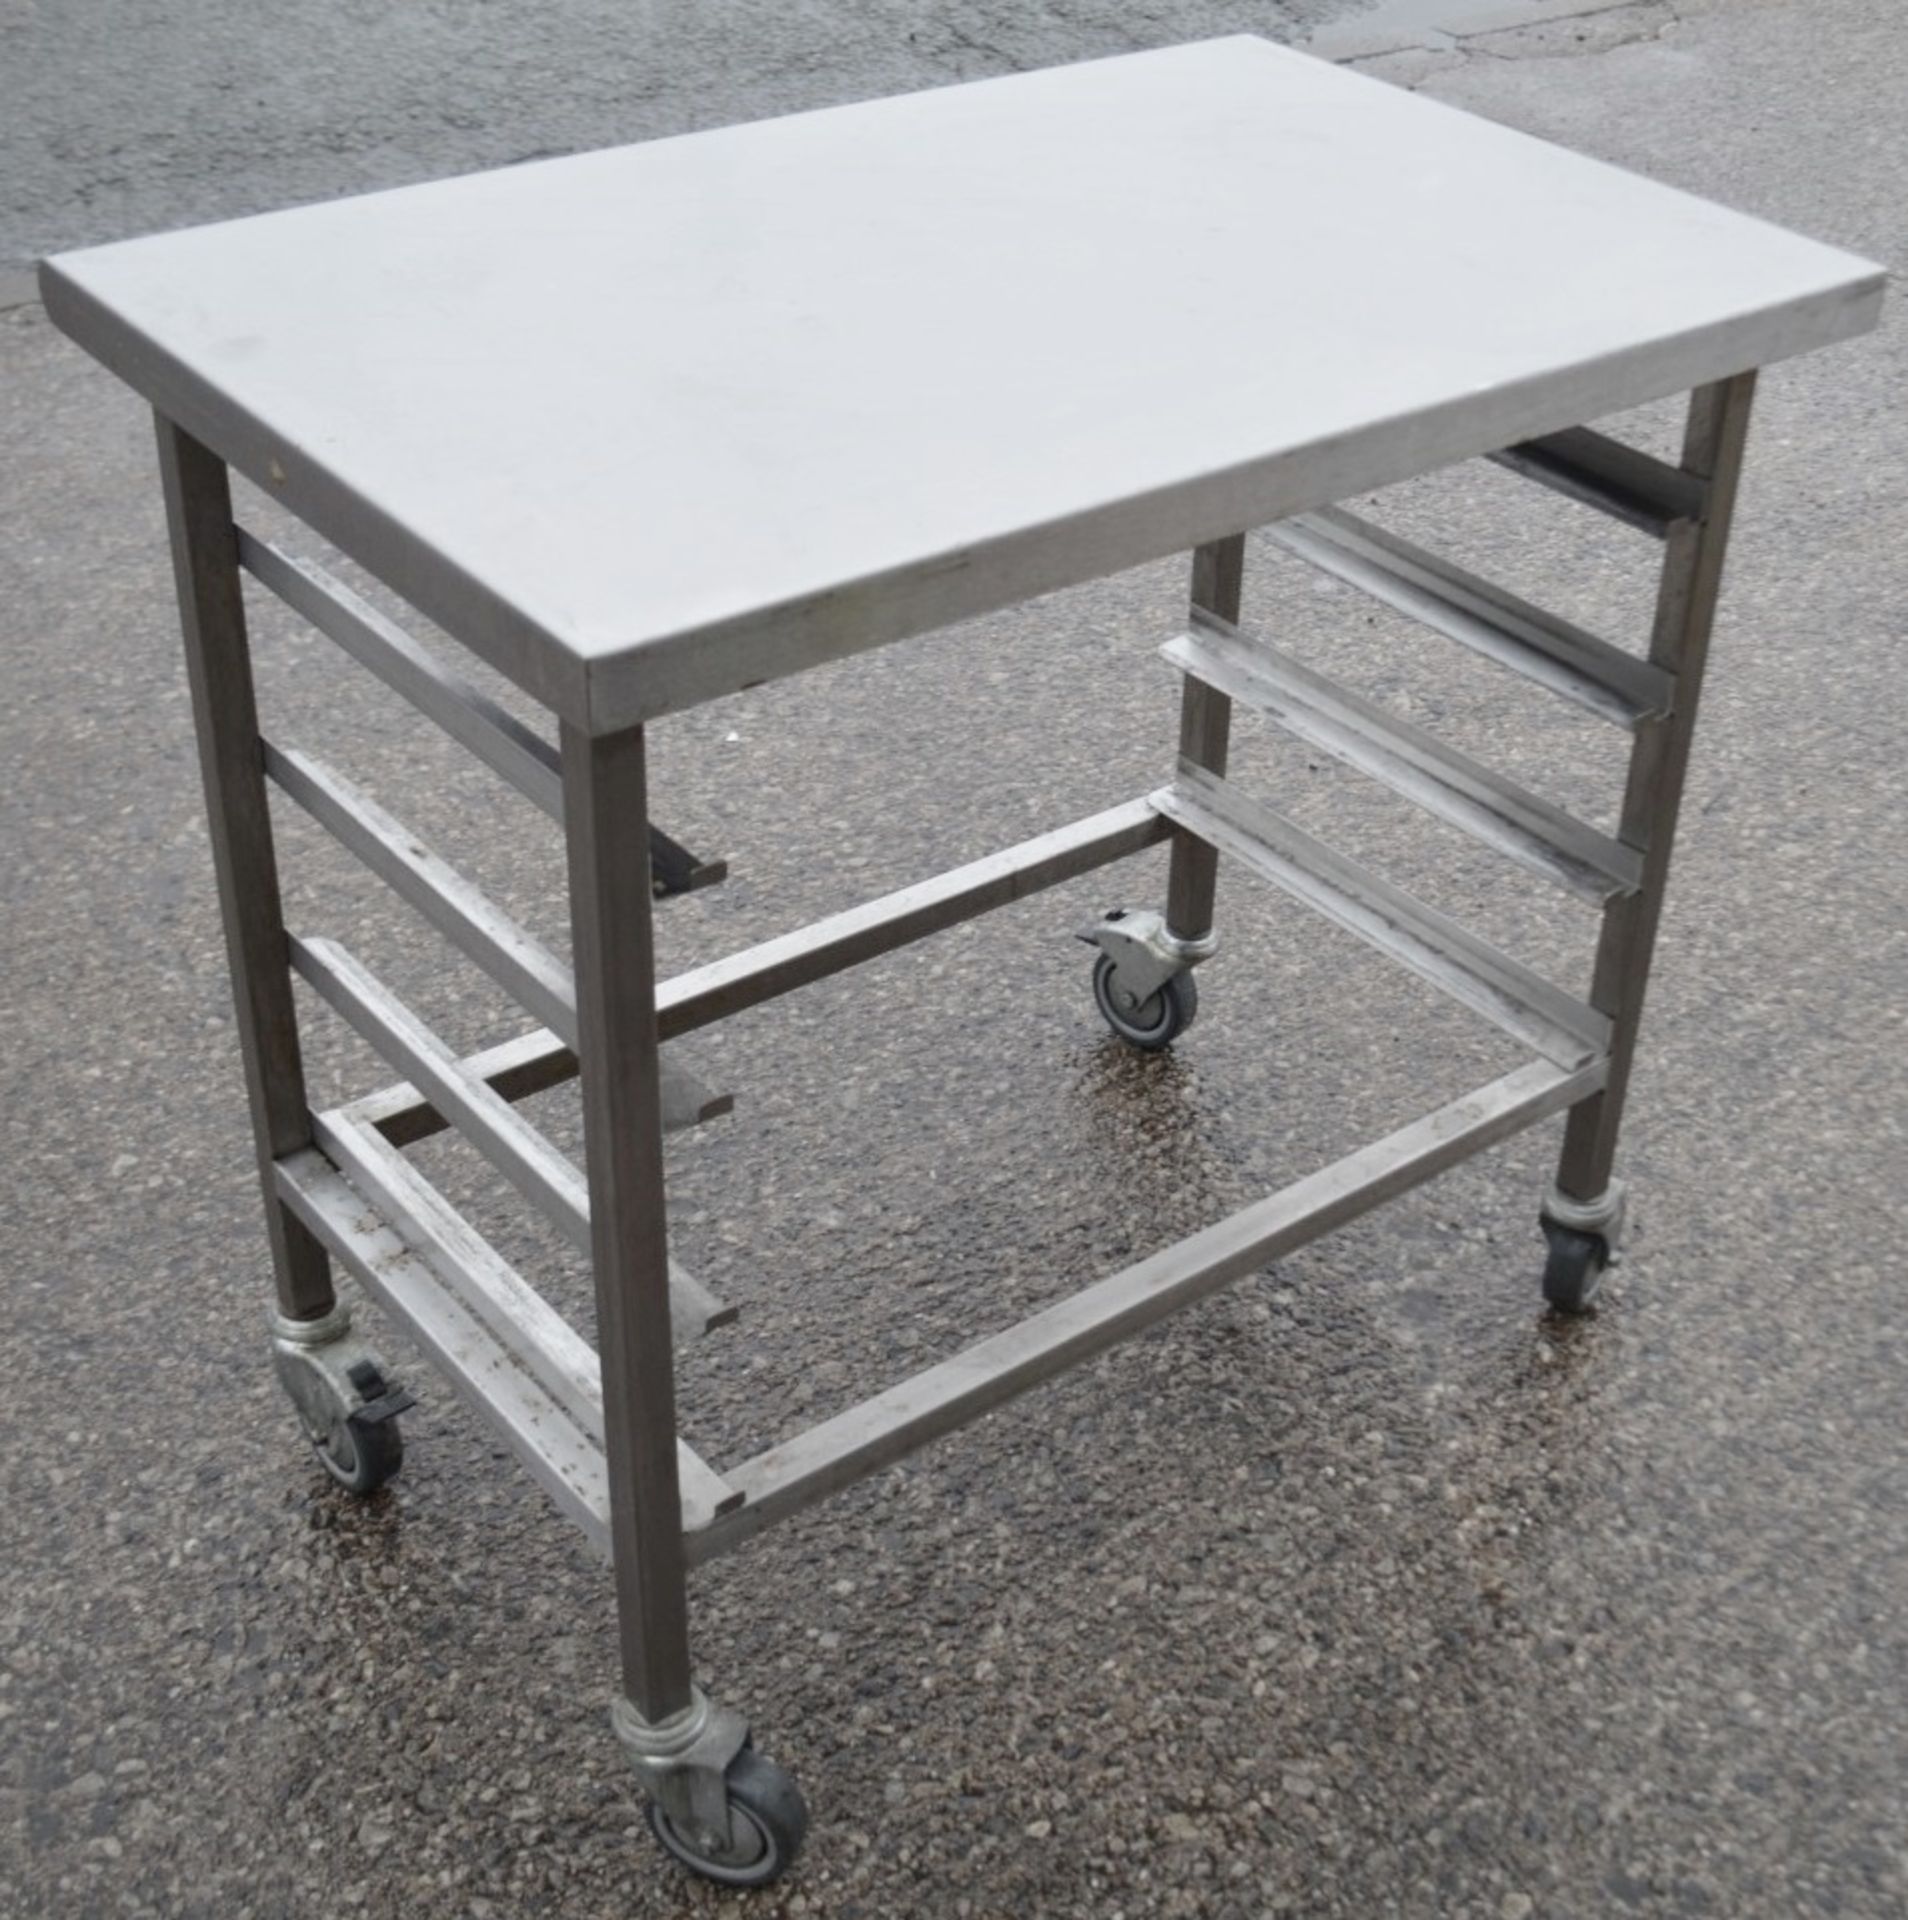 1 x Stainless Steel Commercial Prep Tray Rack - Dimensions: H88 x W91 x D60cm - Very Recently - Image 3 of 4